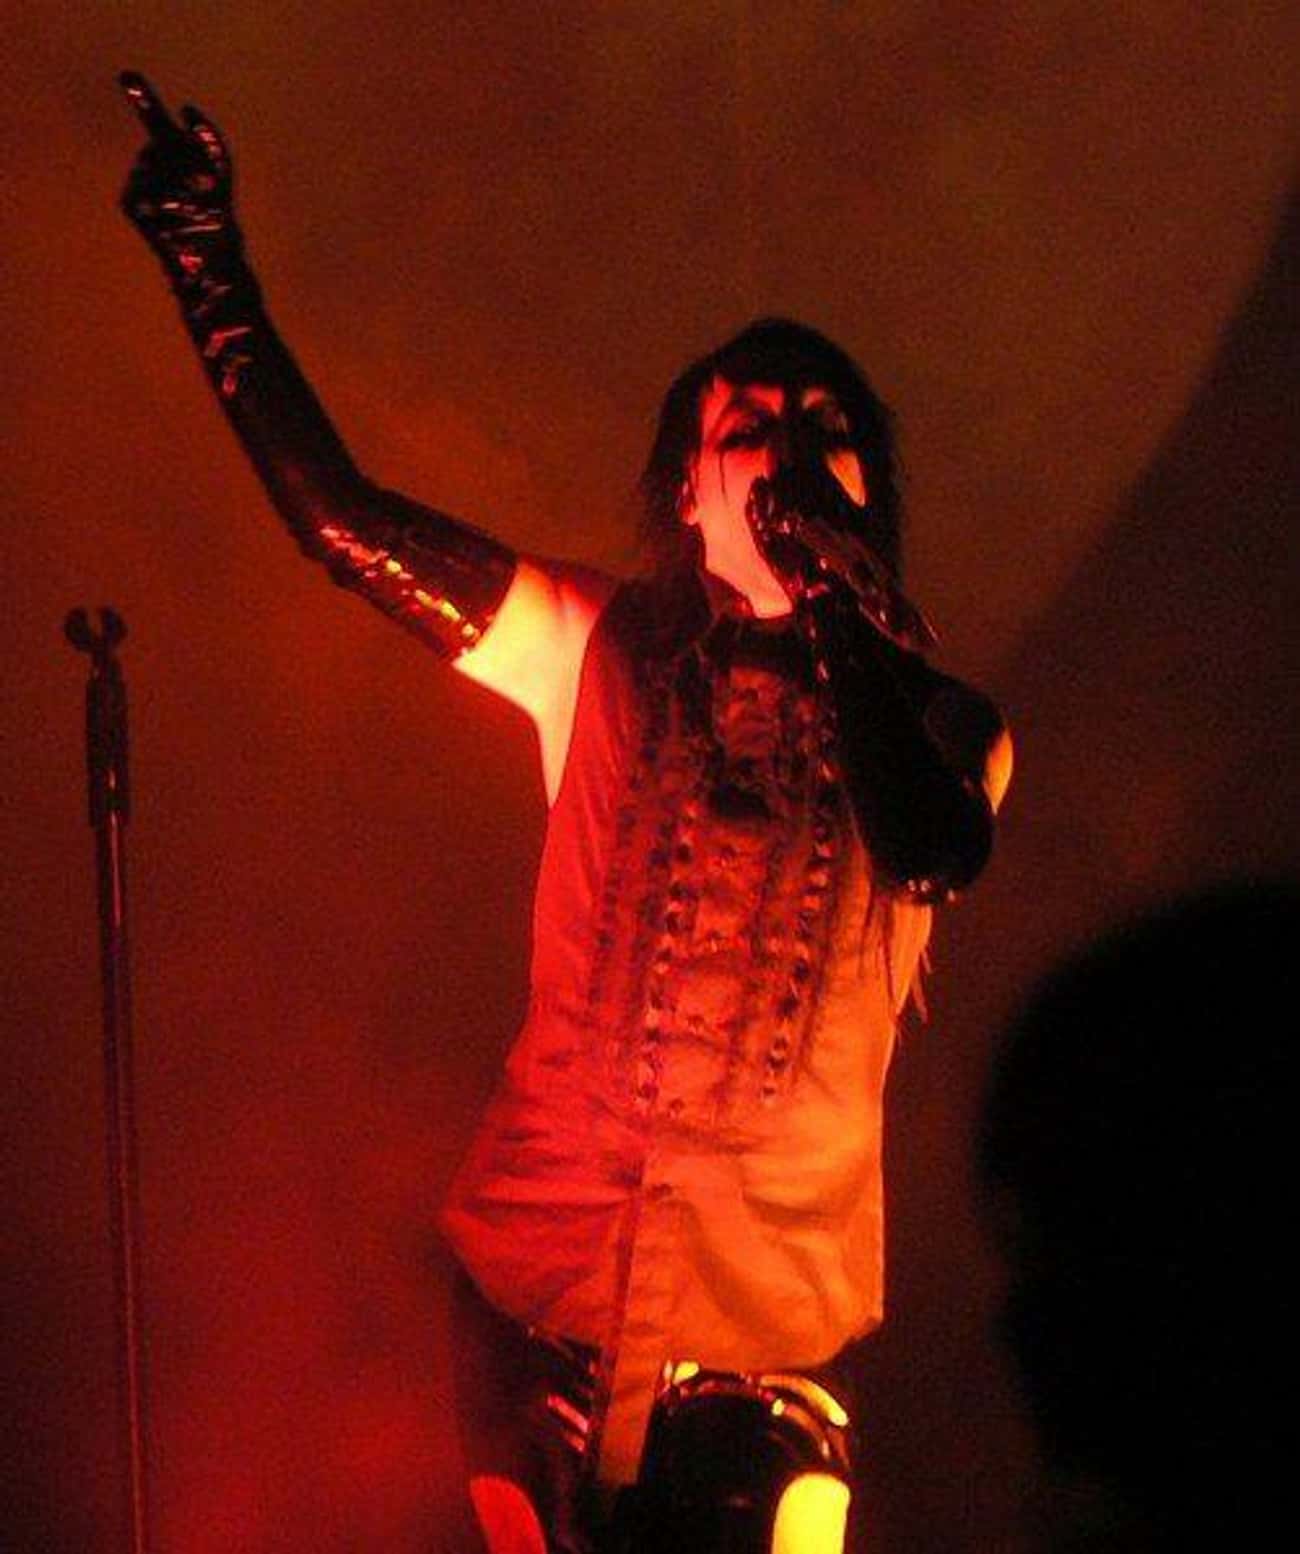 Manson First Met Reznor As A Journalist, Then Became His Opening Act